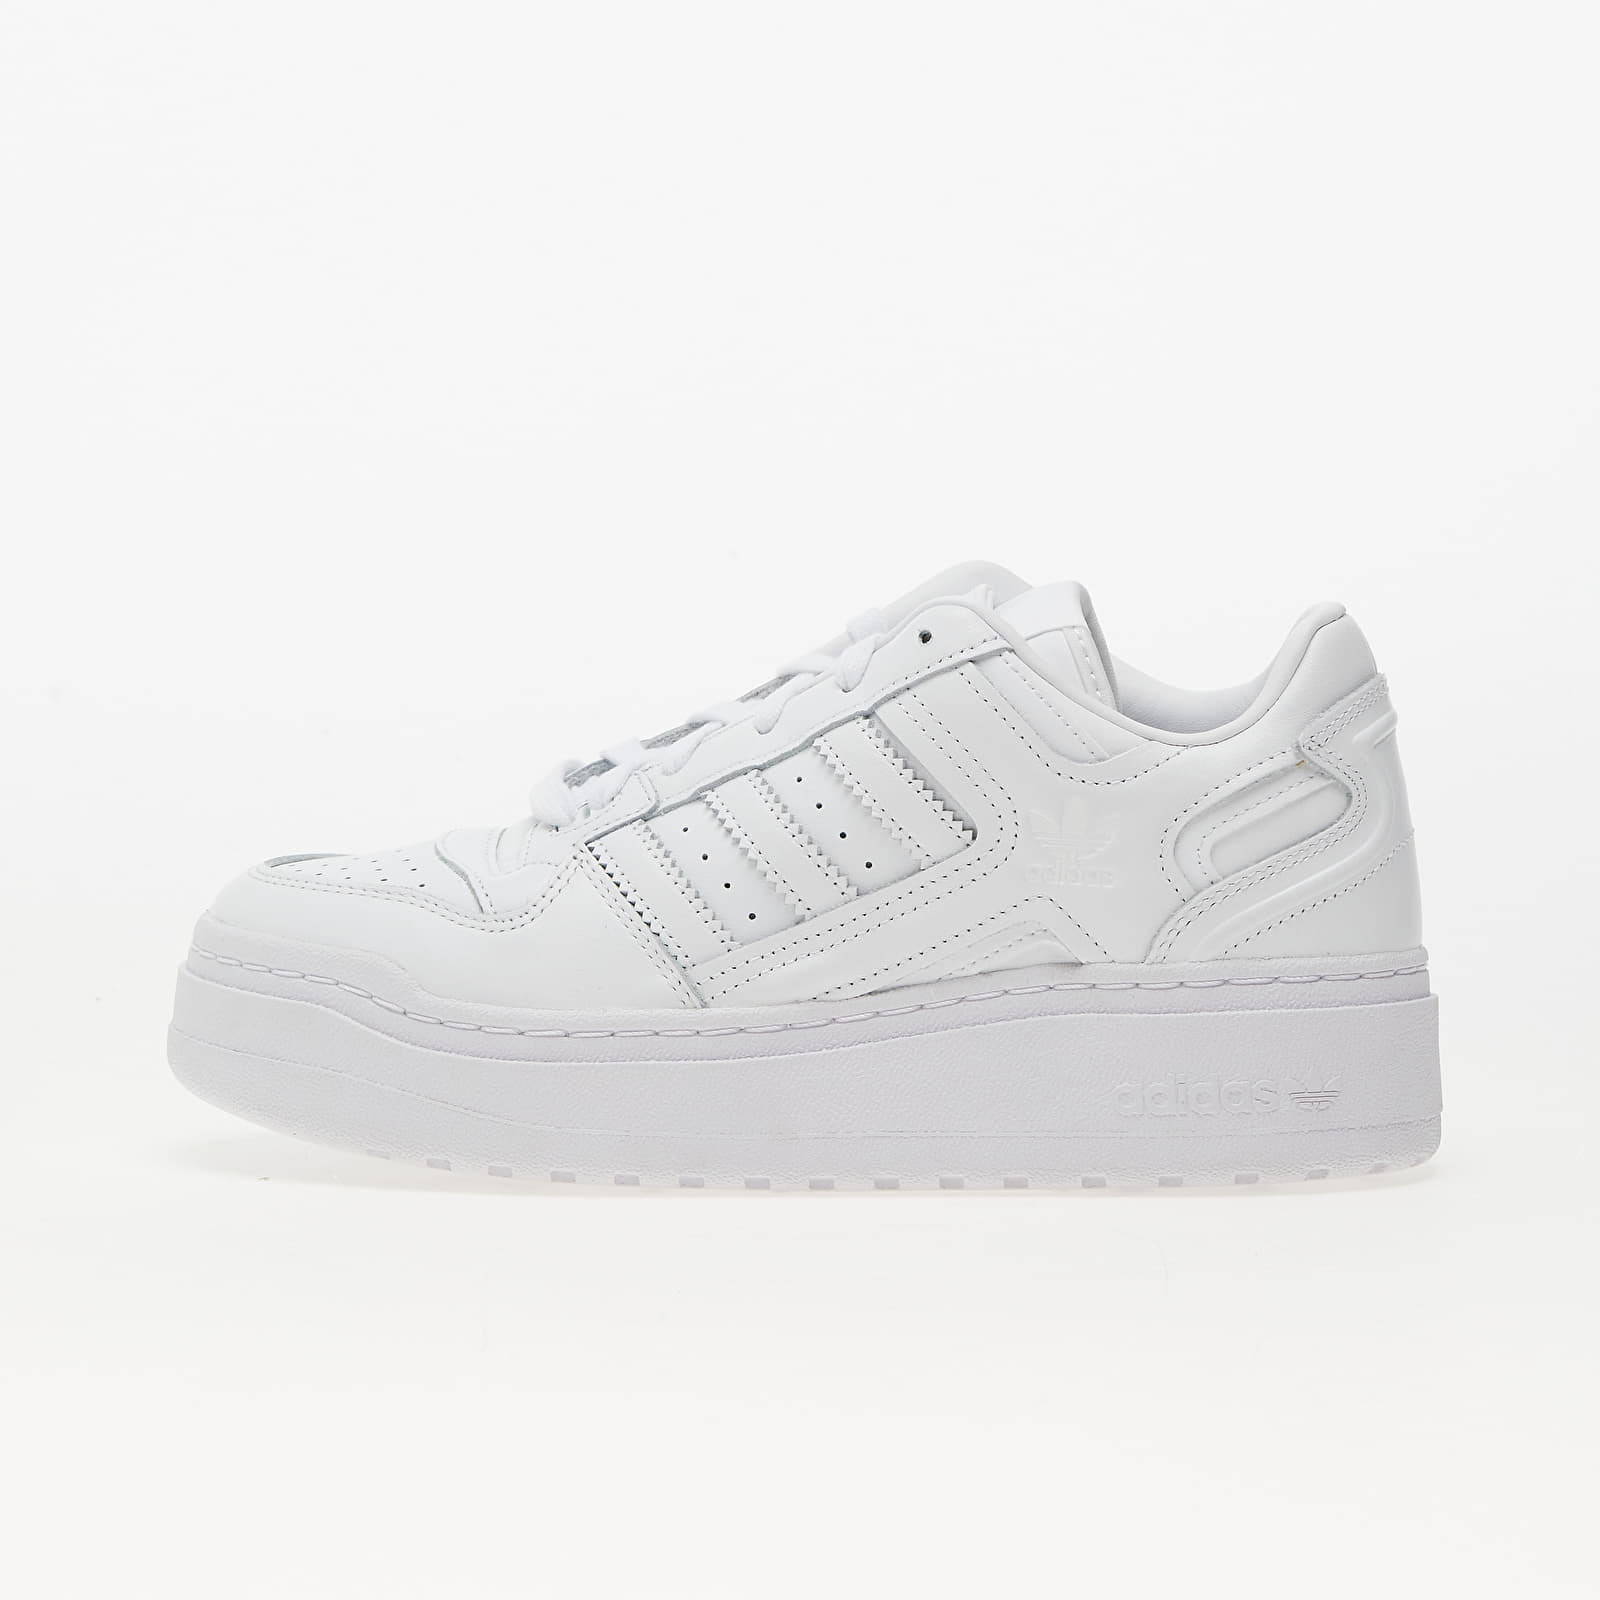 Levně adidas Forum Xlg Ftw White/ Ftw White/ Crystal White